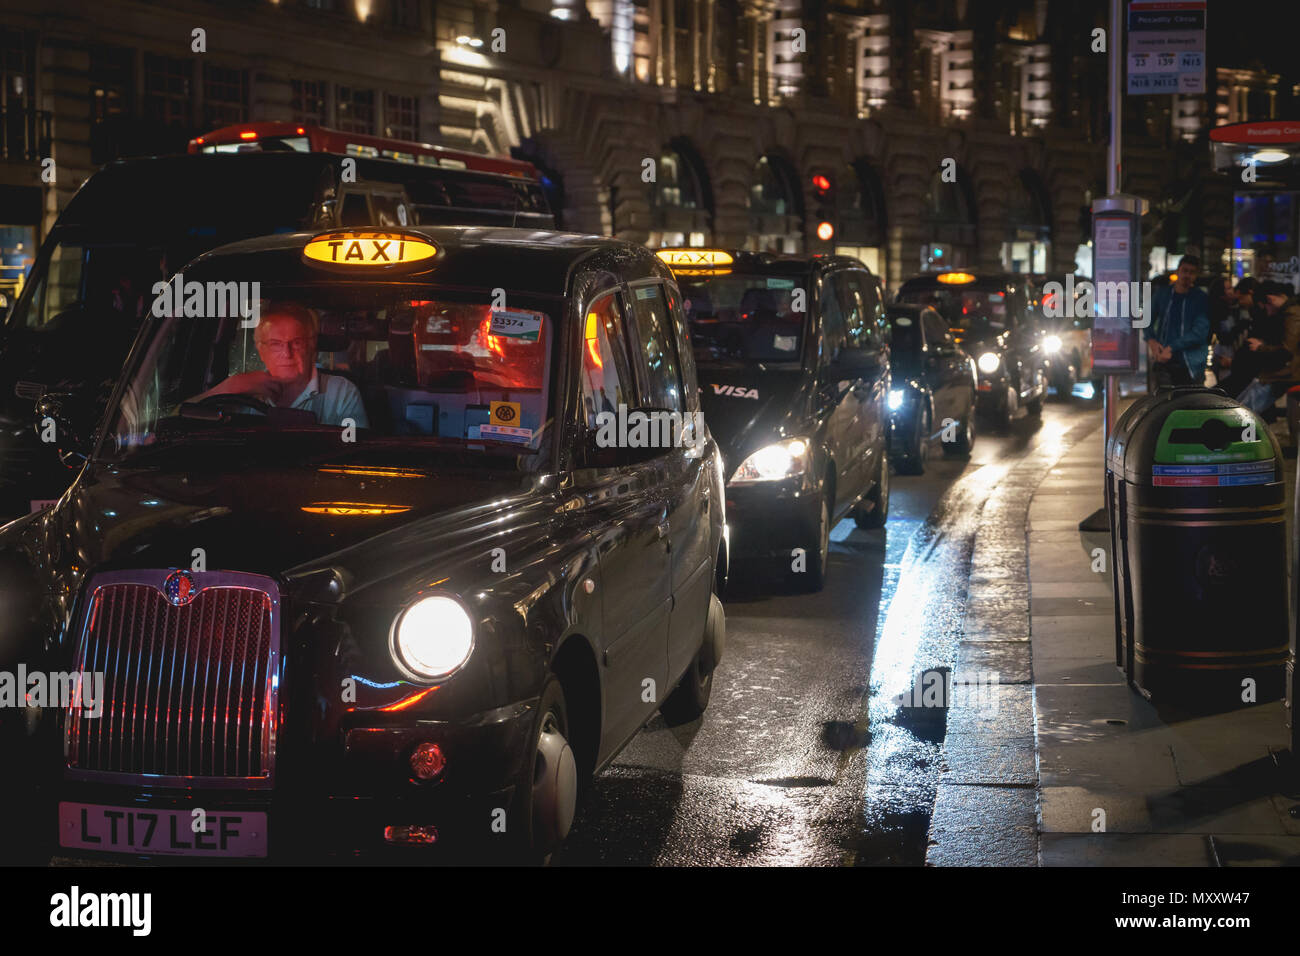 London, UK - October 2017. A row of the iconic black cabs on Regent Street at night. Landscape format. Stock Photo